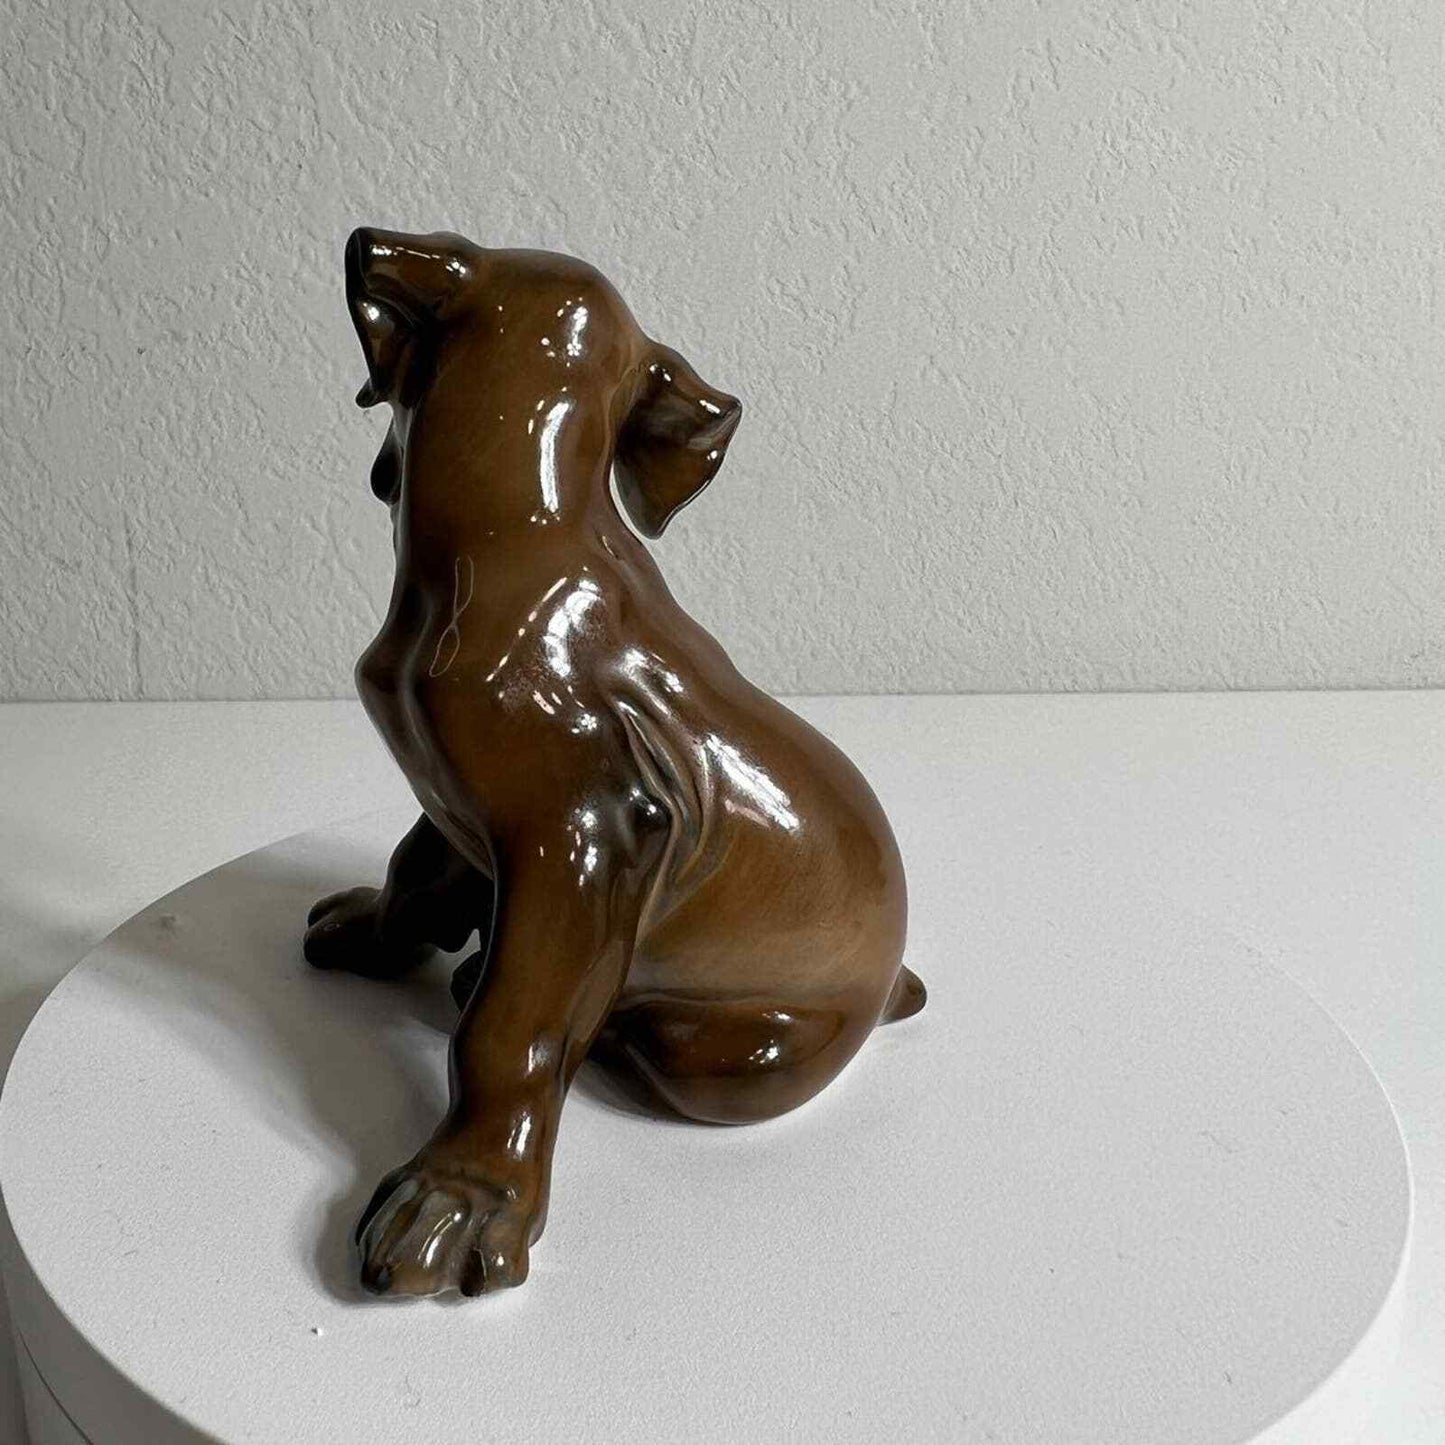 Rosenthal Germany Boxer Dog Puppy Figurine Vintage Hand-Painted Treasure 1950s